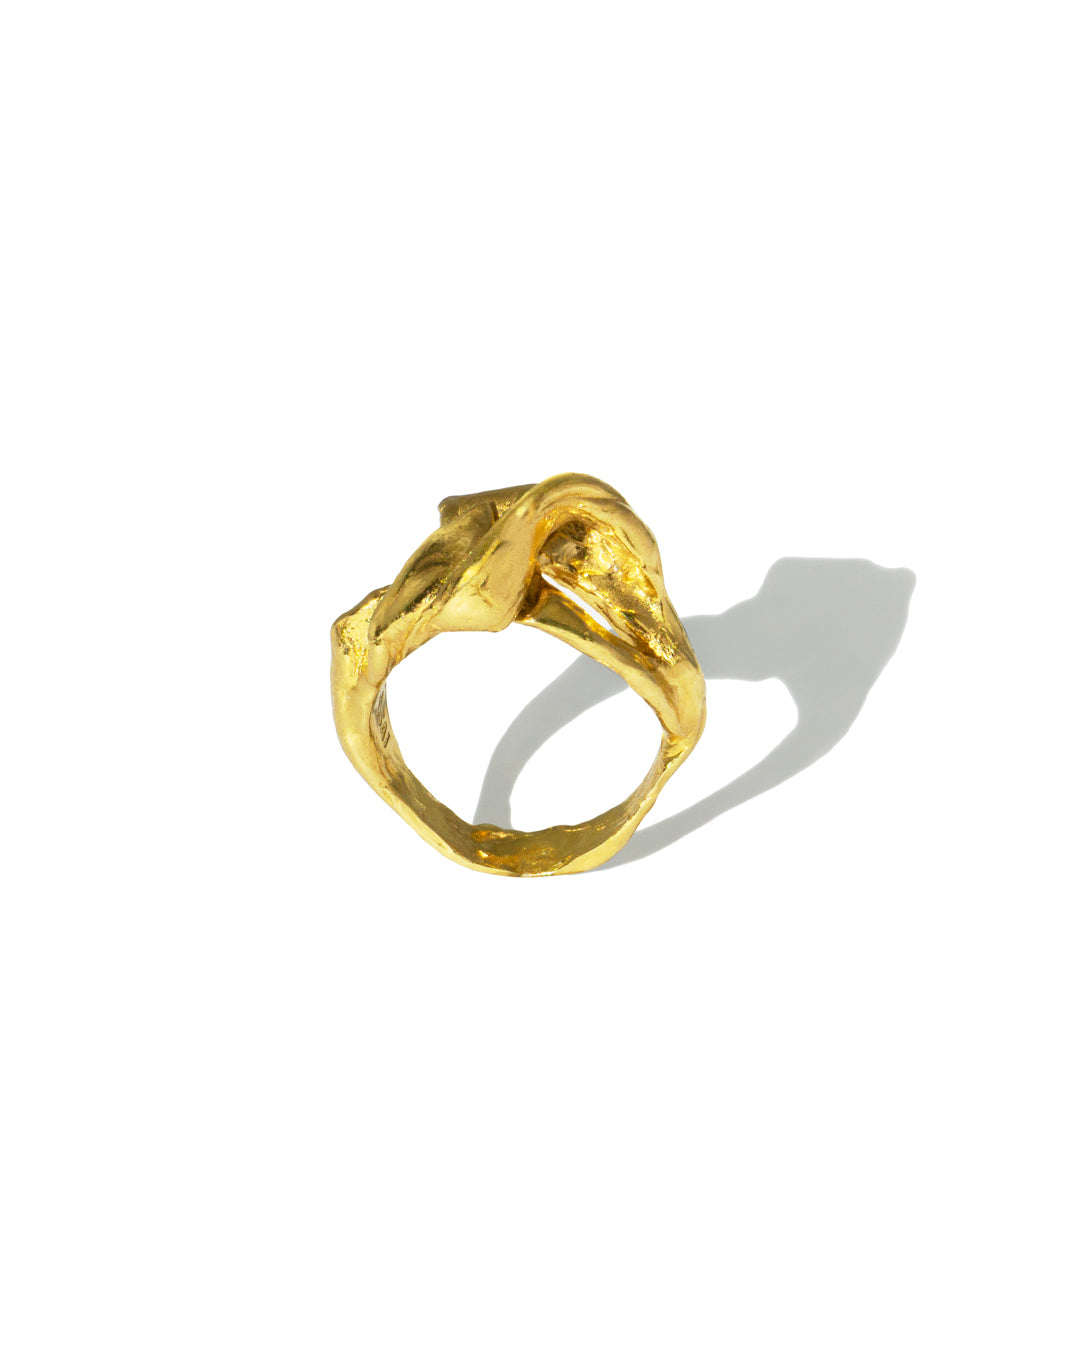  Handmade handcrafted jewelry silver gold ring